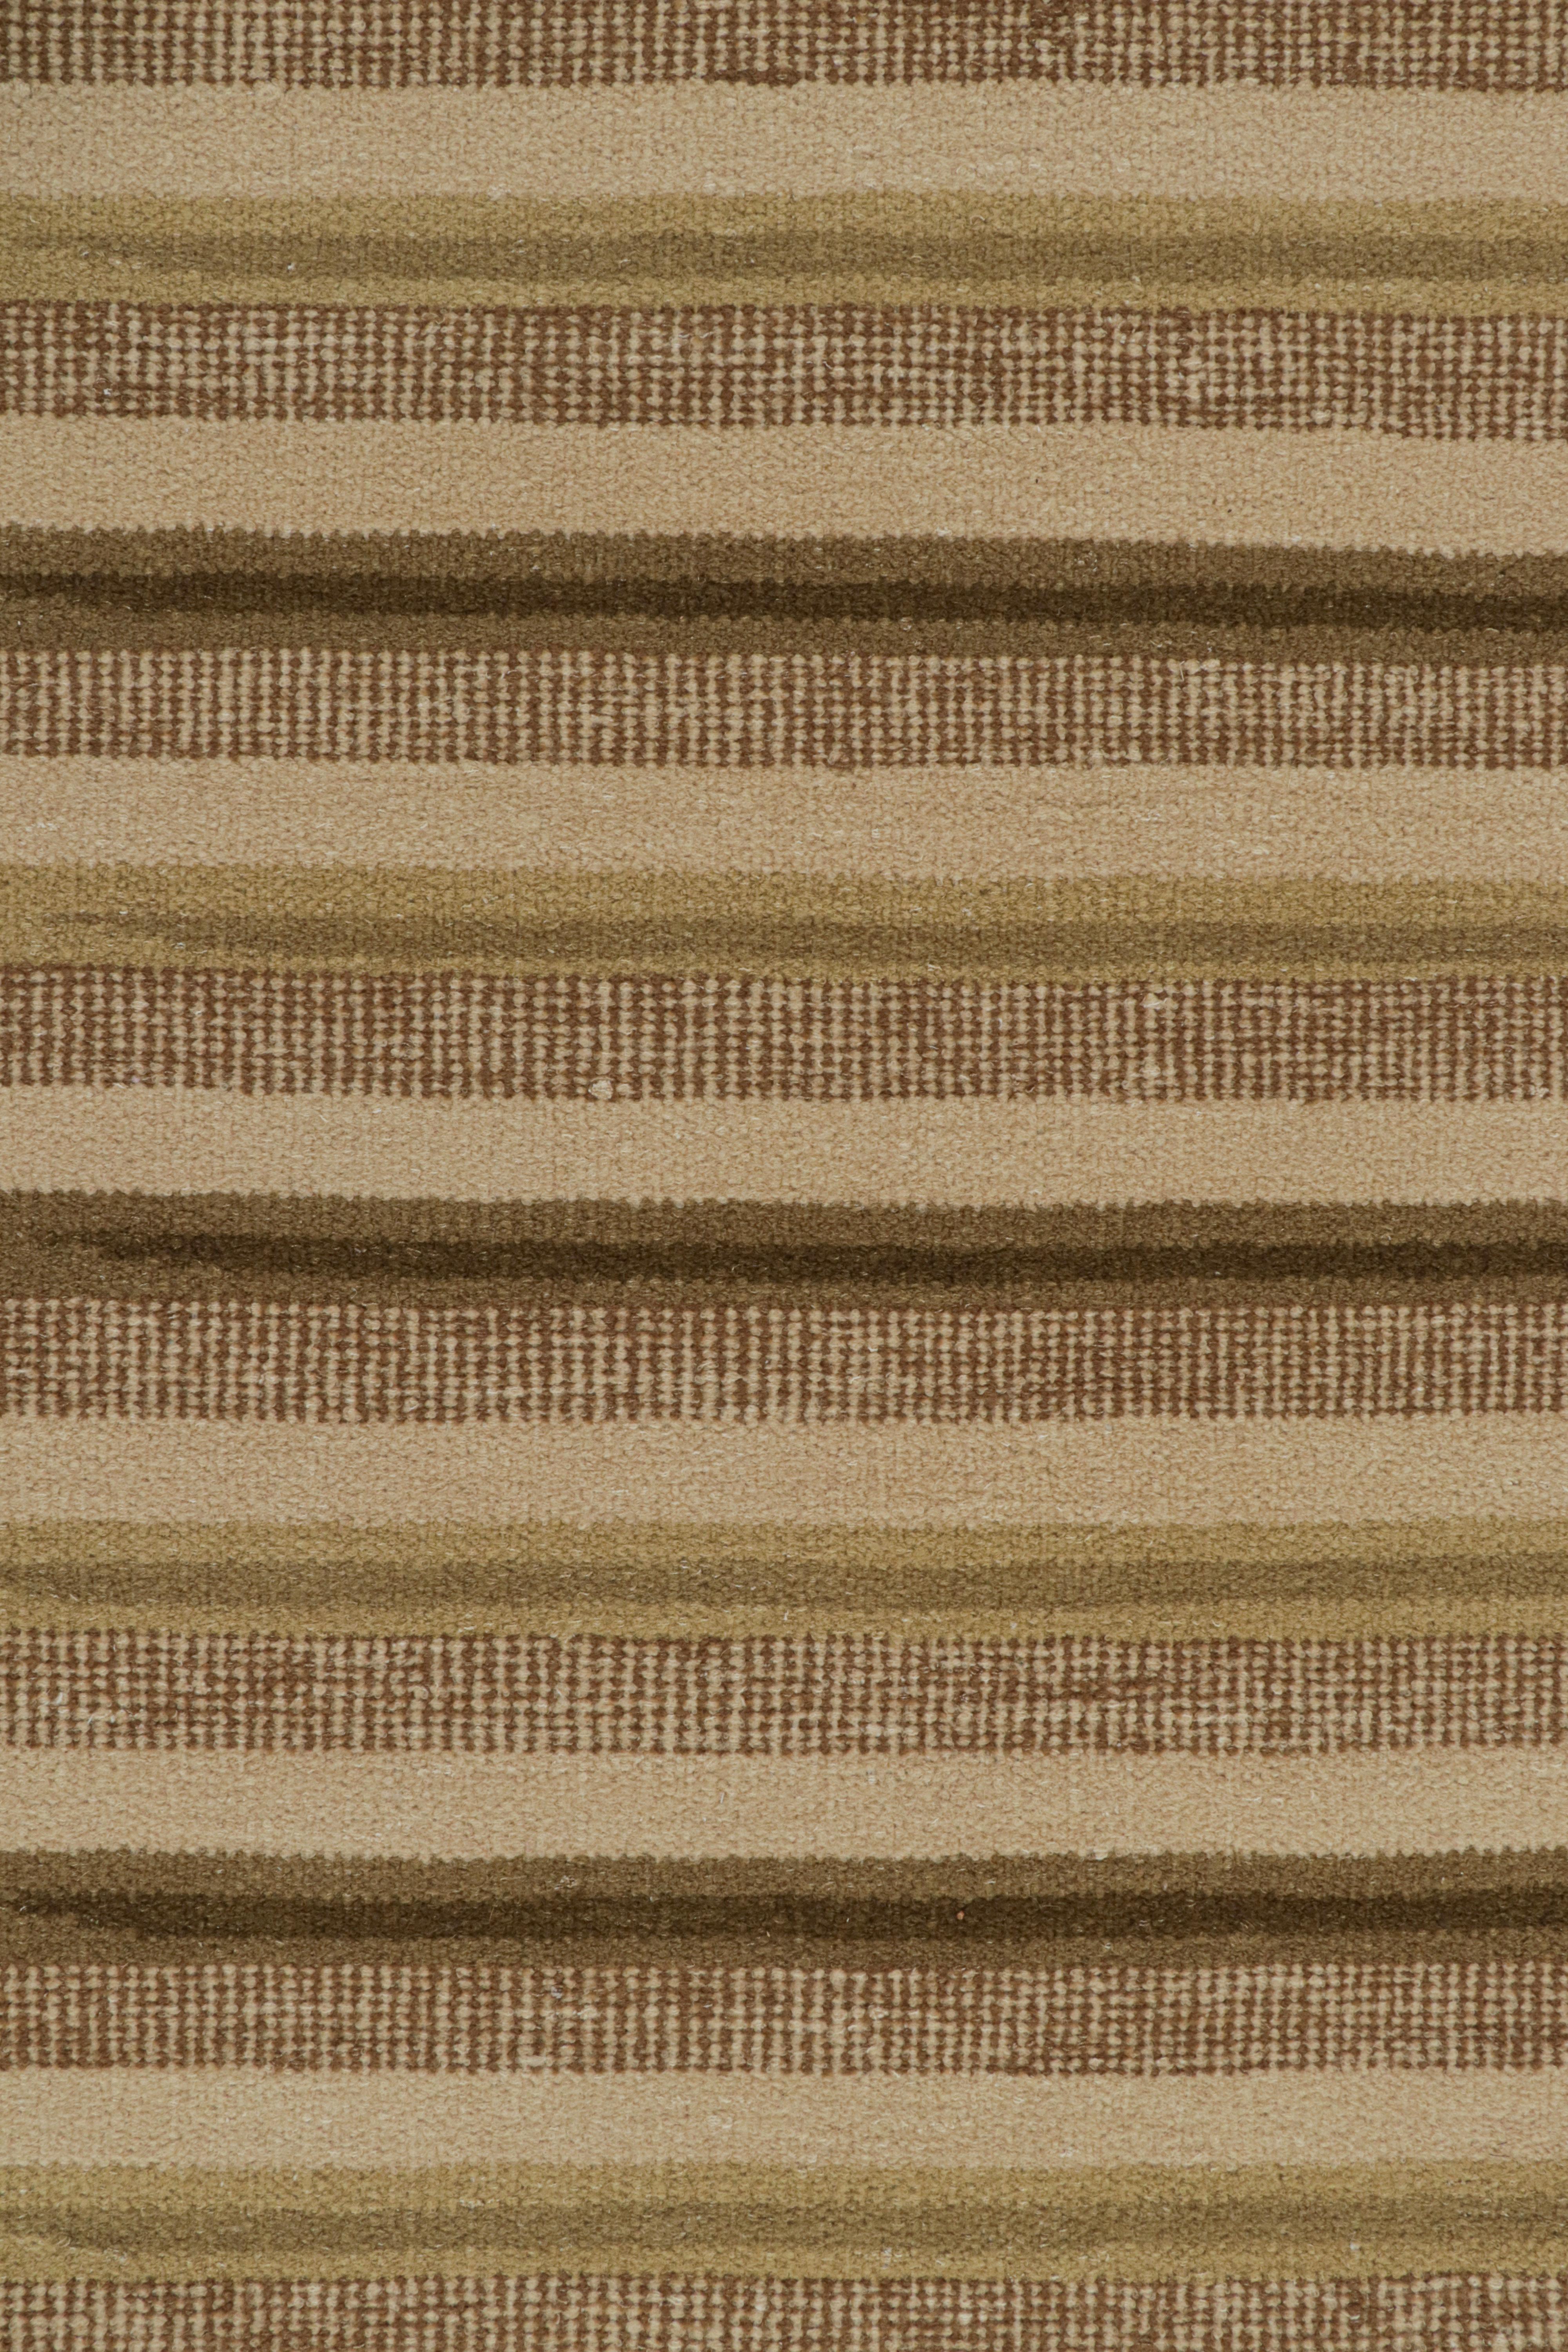 Hand-Woven Rug & Kilim’s Scandinavian Style Rug with Chartreuse and Beige-Brown Stripes For Sale